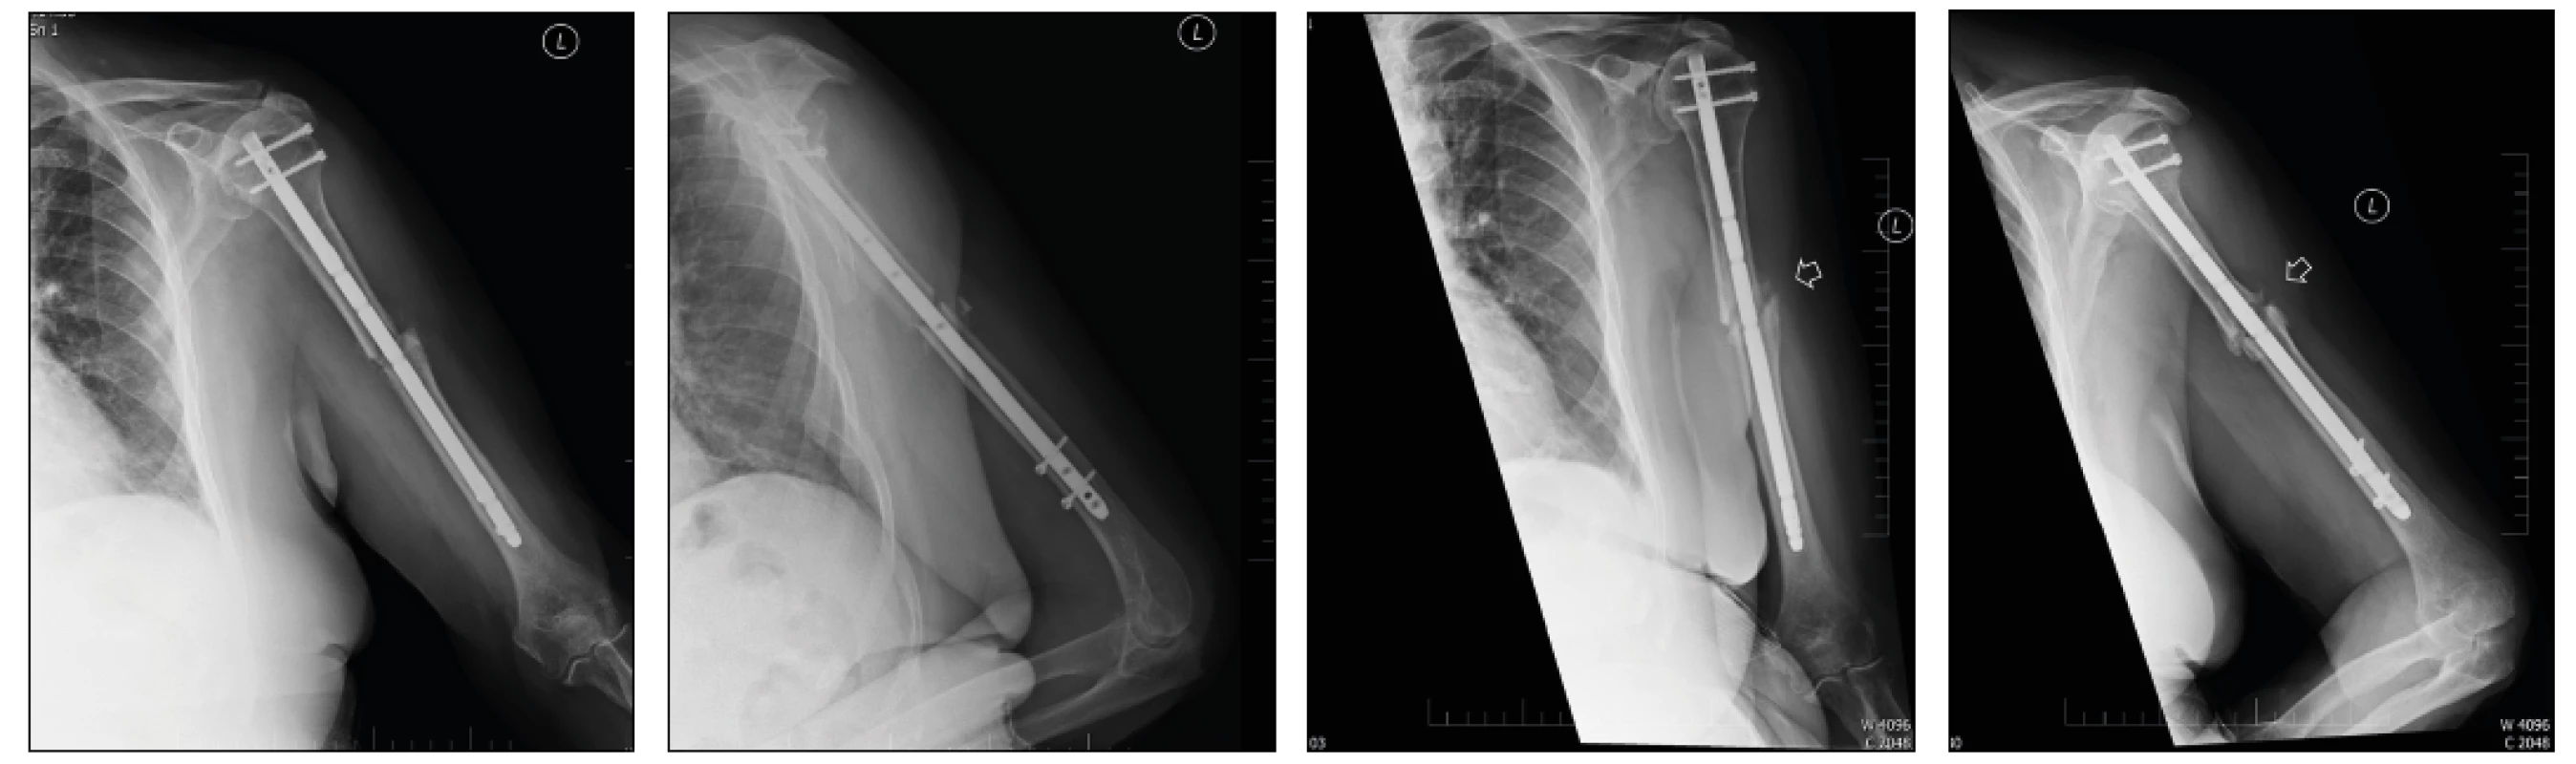 Radiograph of the humerus in anteroposterior and lateral projections. Postoperative radiograph (1a) and radiograph taken 13 months after injury (1b) depict a nail osteosynthesis of diaphyseal humeral fracture type A3. A non-union developed due to insufficient proximal fixation of the nail and associated instability at the fracture site